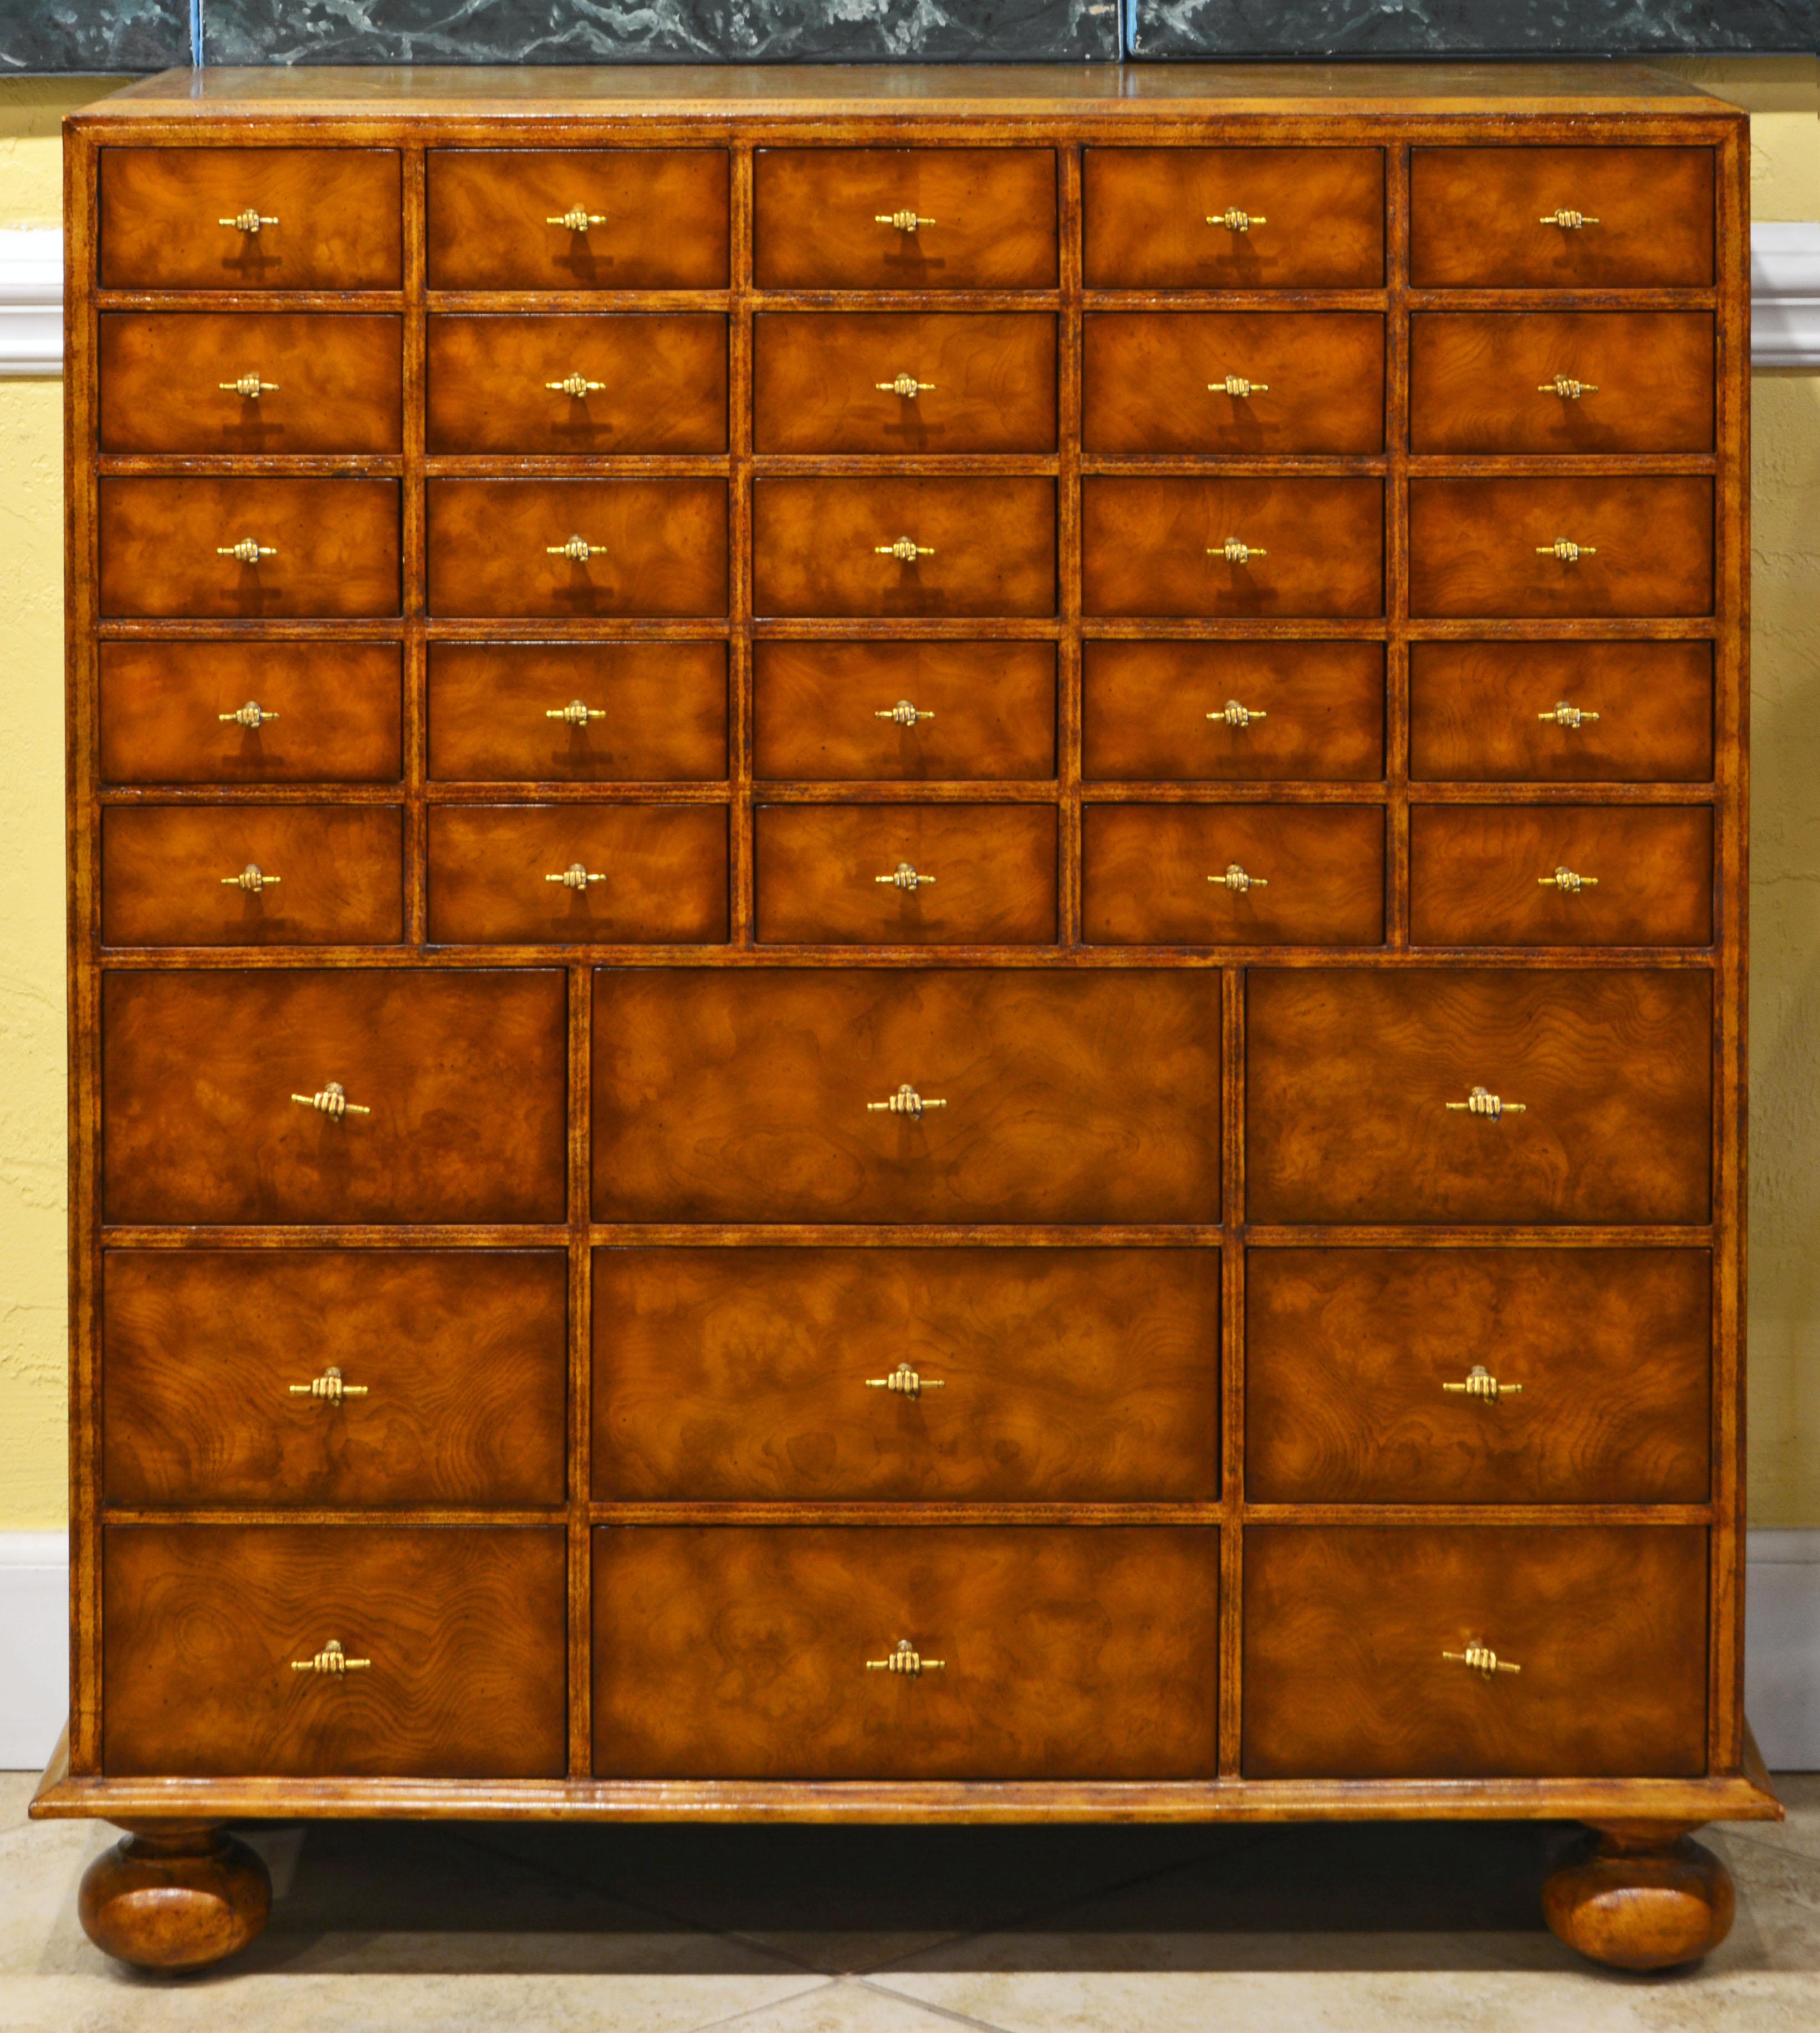 A rare mid-century Maitland-Smith Florentine style chest of 34 smaller (upper part) and larger (lower part) drawers. The sides and top are entirely clad in finely tooled and gold trimmed light tanned leather. The drawer fronts feature a warm honey